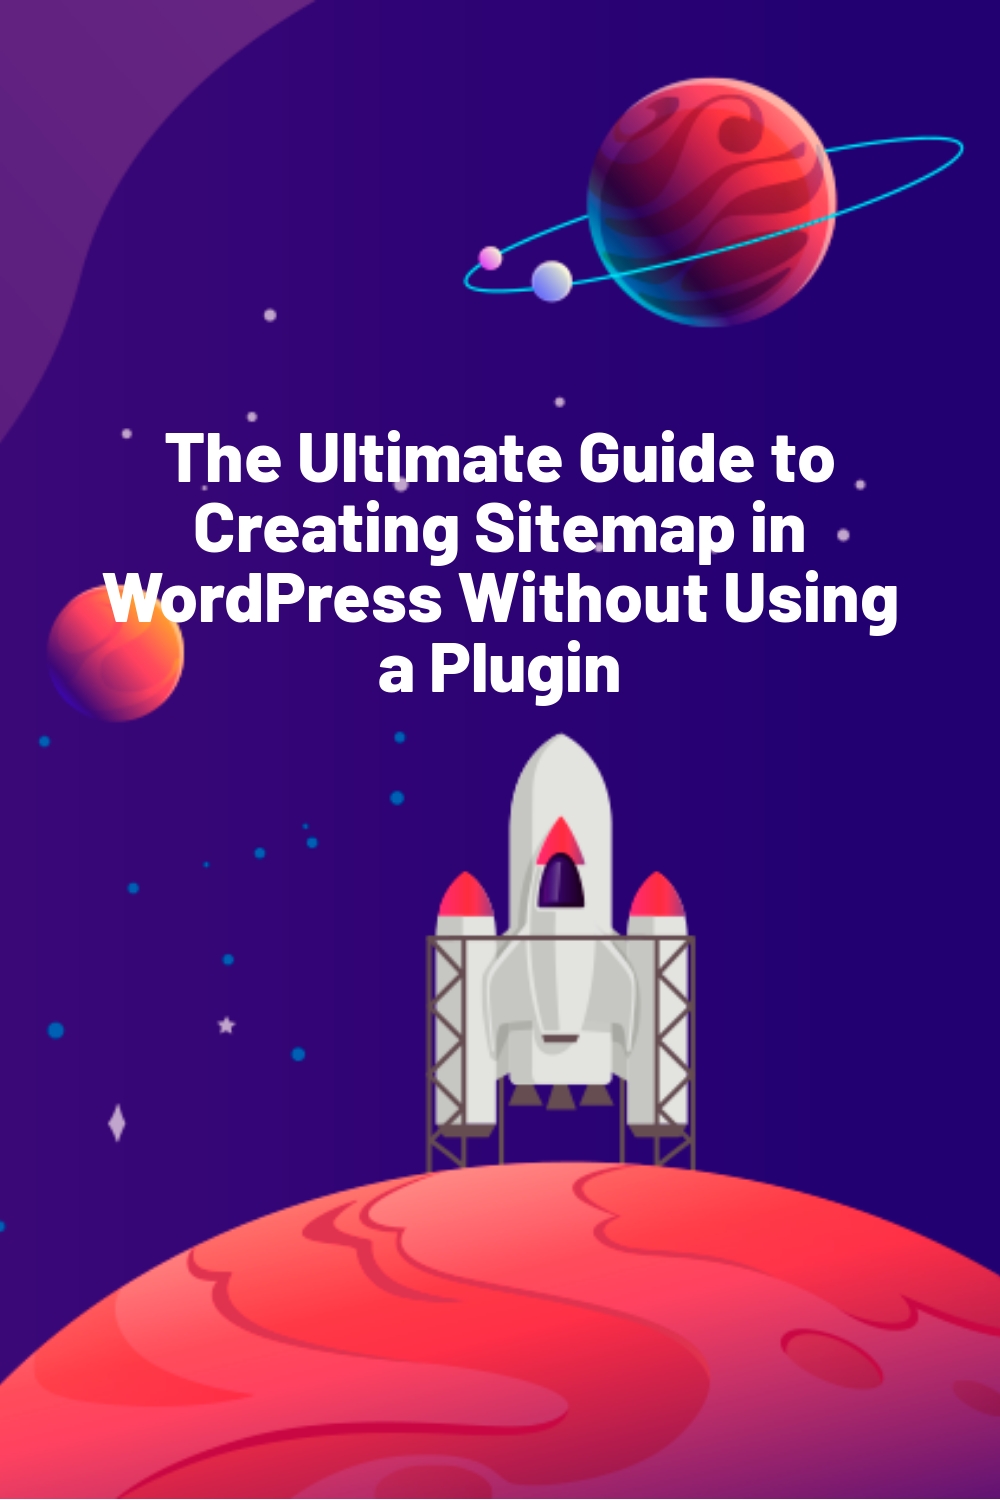 The Ultimate Guide to Creating Sitemap in WordPress Without Using a Plugin